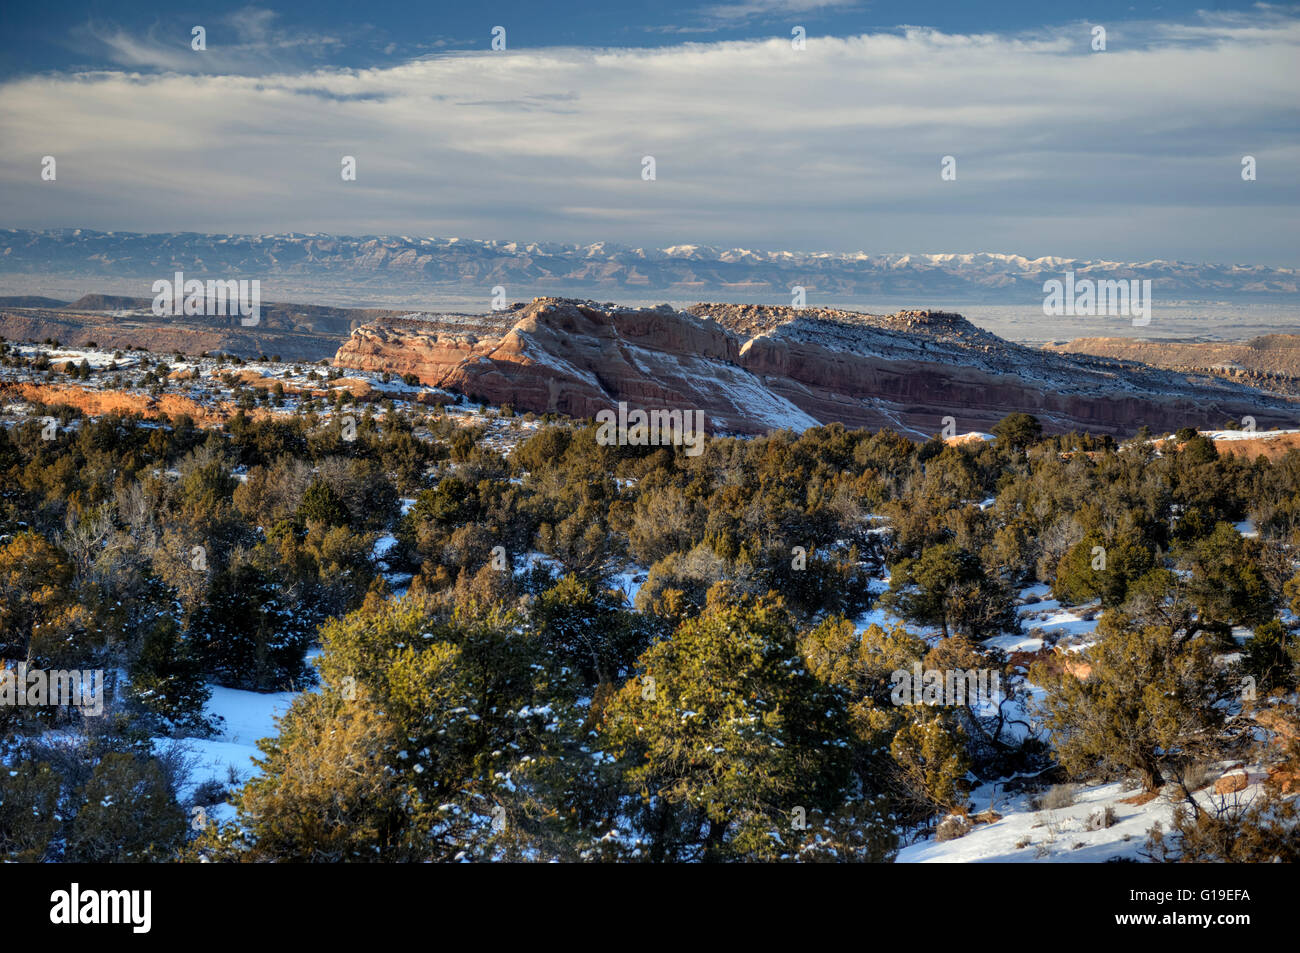 Little Pinto Mesa, as seen from the 'Top of the World' 4WD trail east of Moab, Utah. Stock Photo